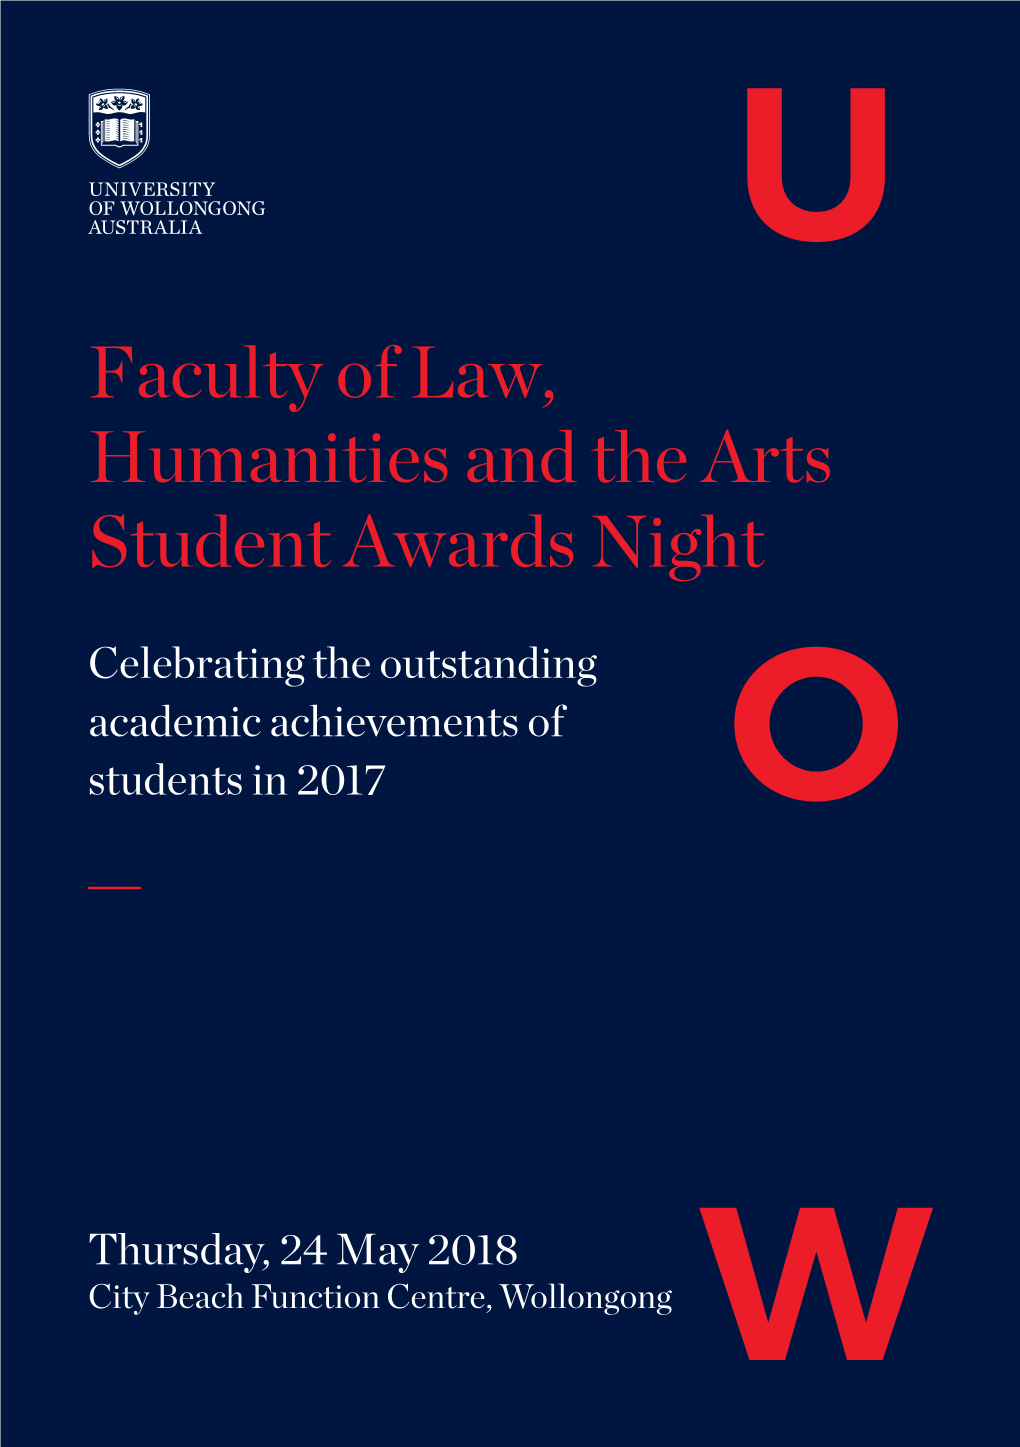 Faculty of Law, Humanities and the Arts Student Awards Night